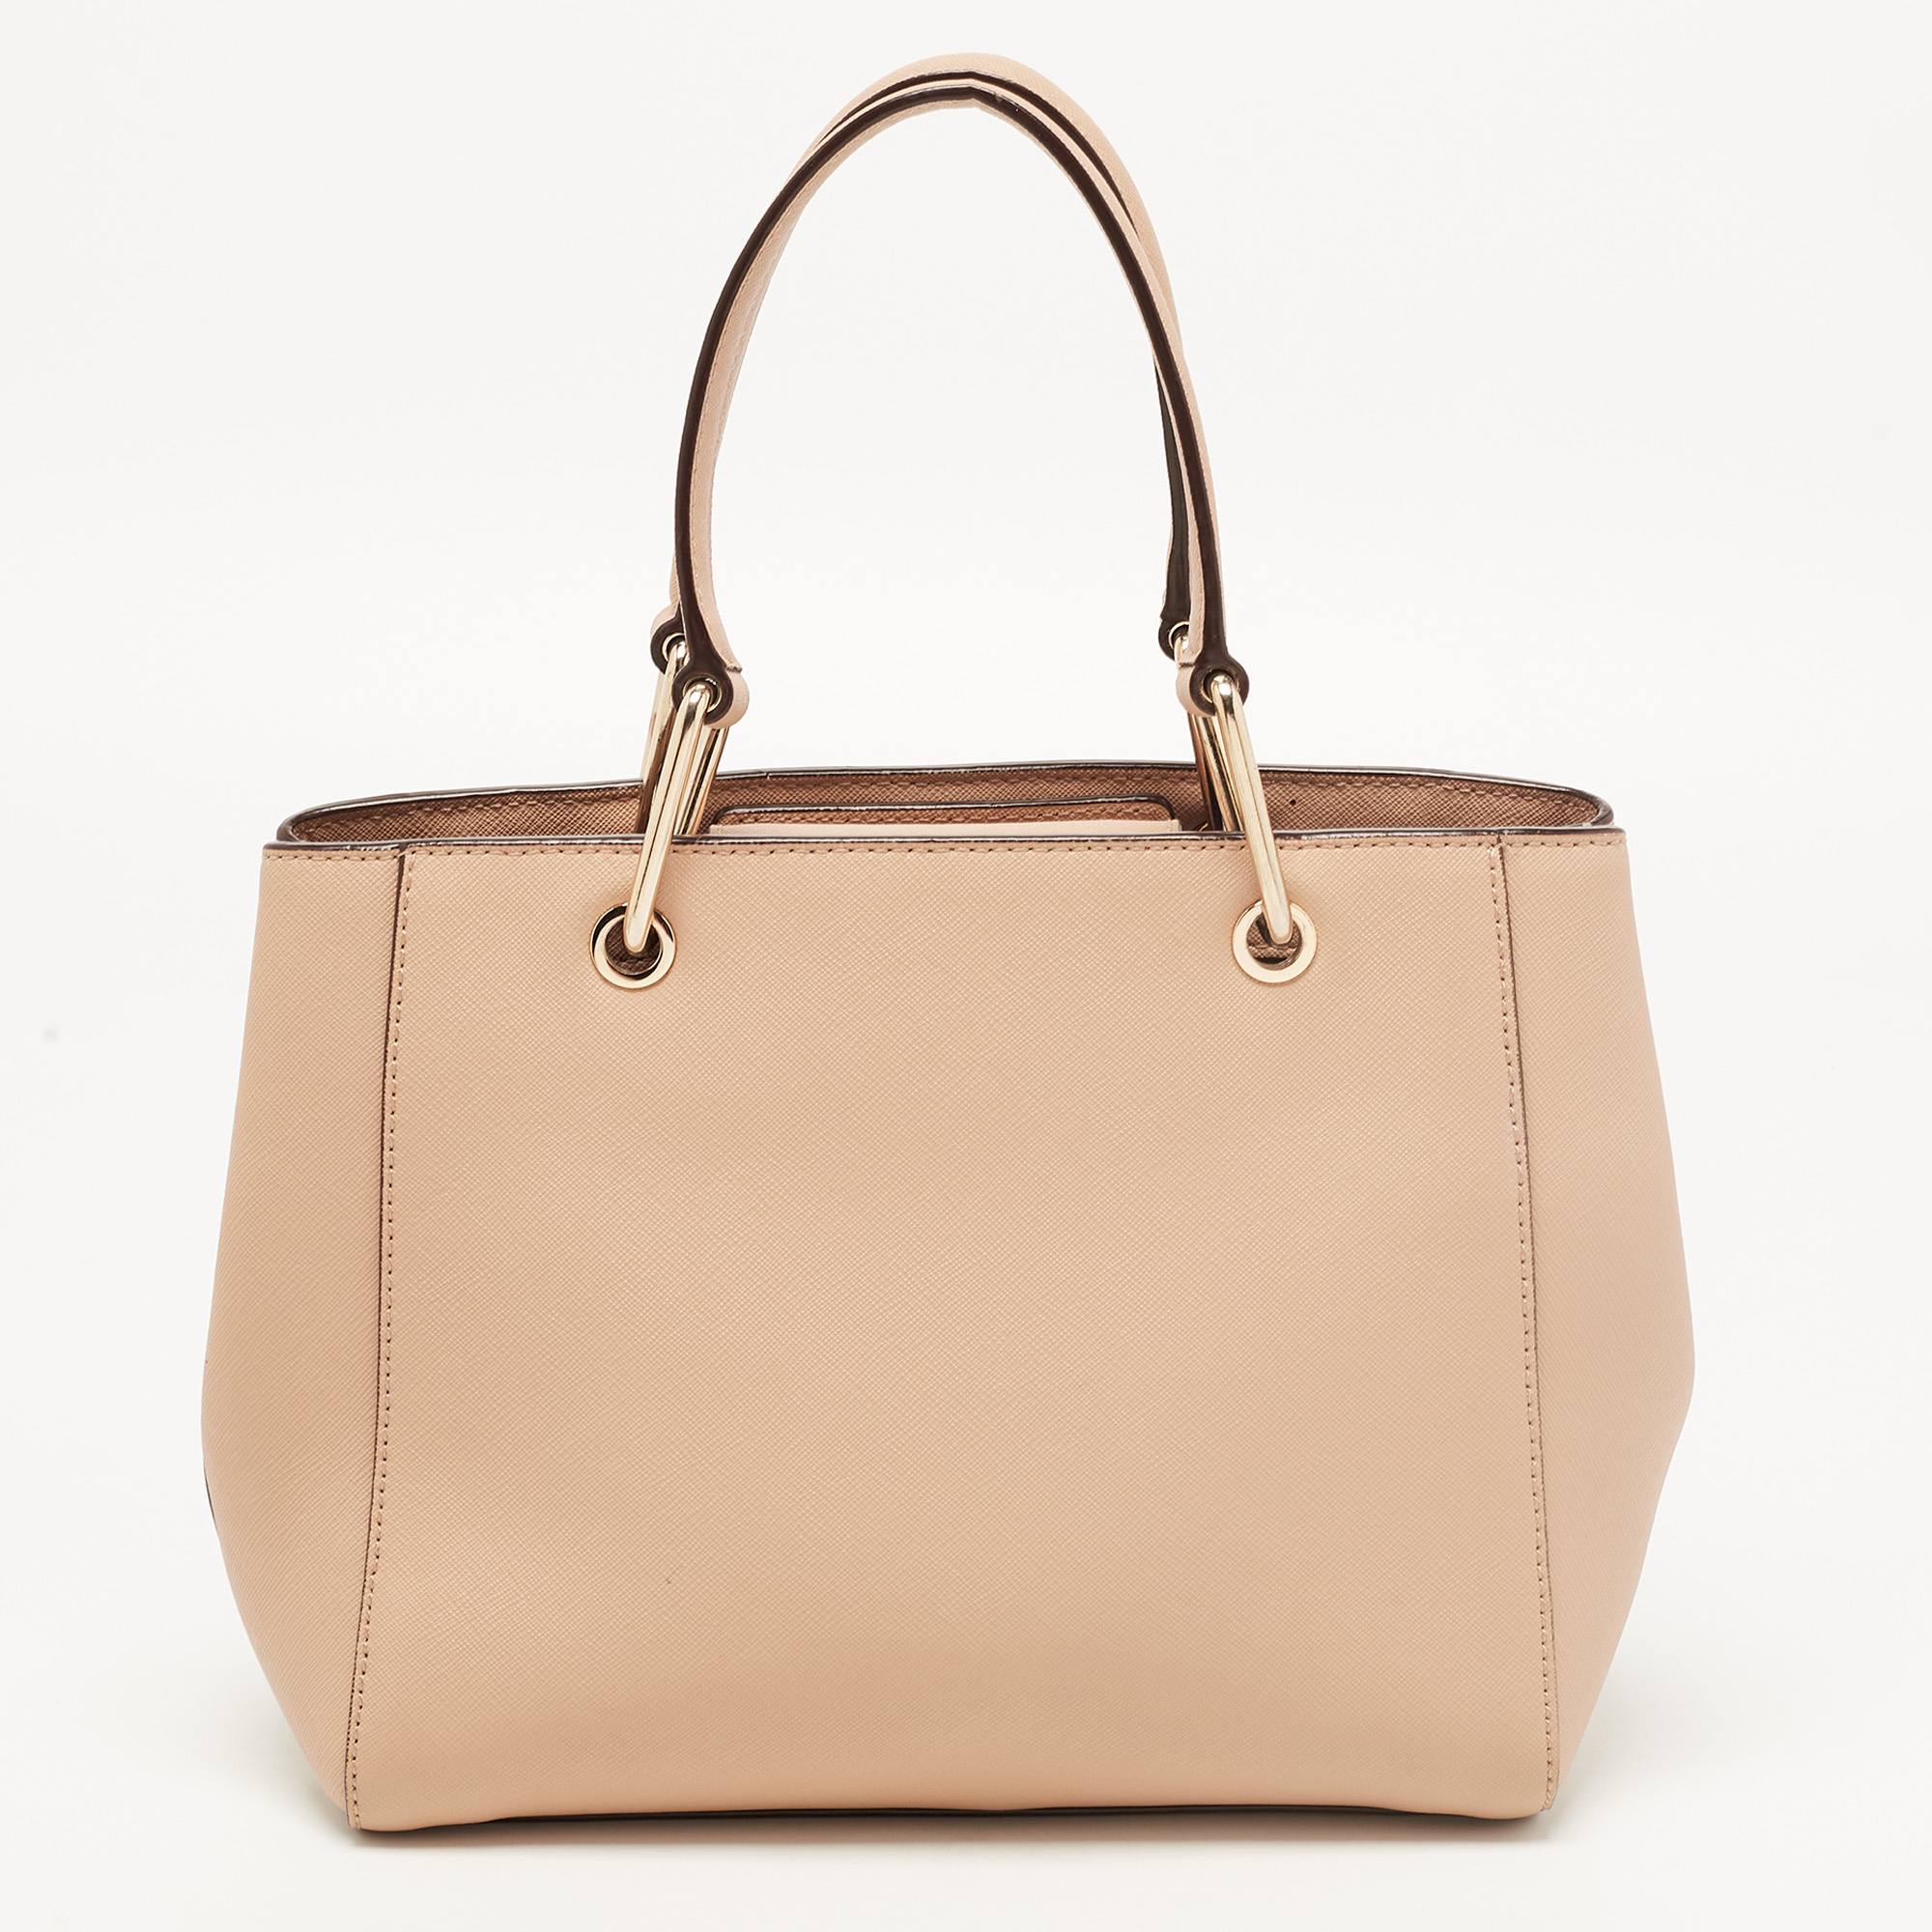 DKNY Beige Leather Tote